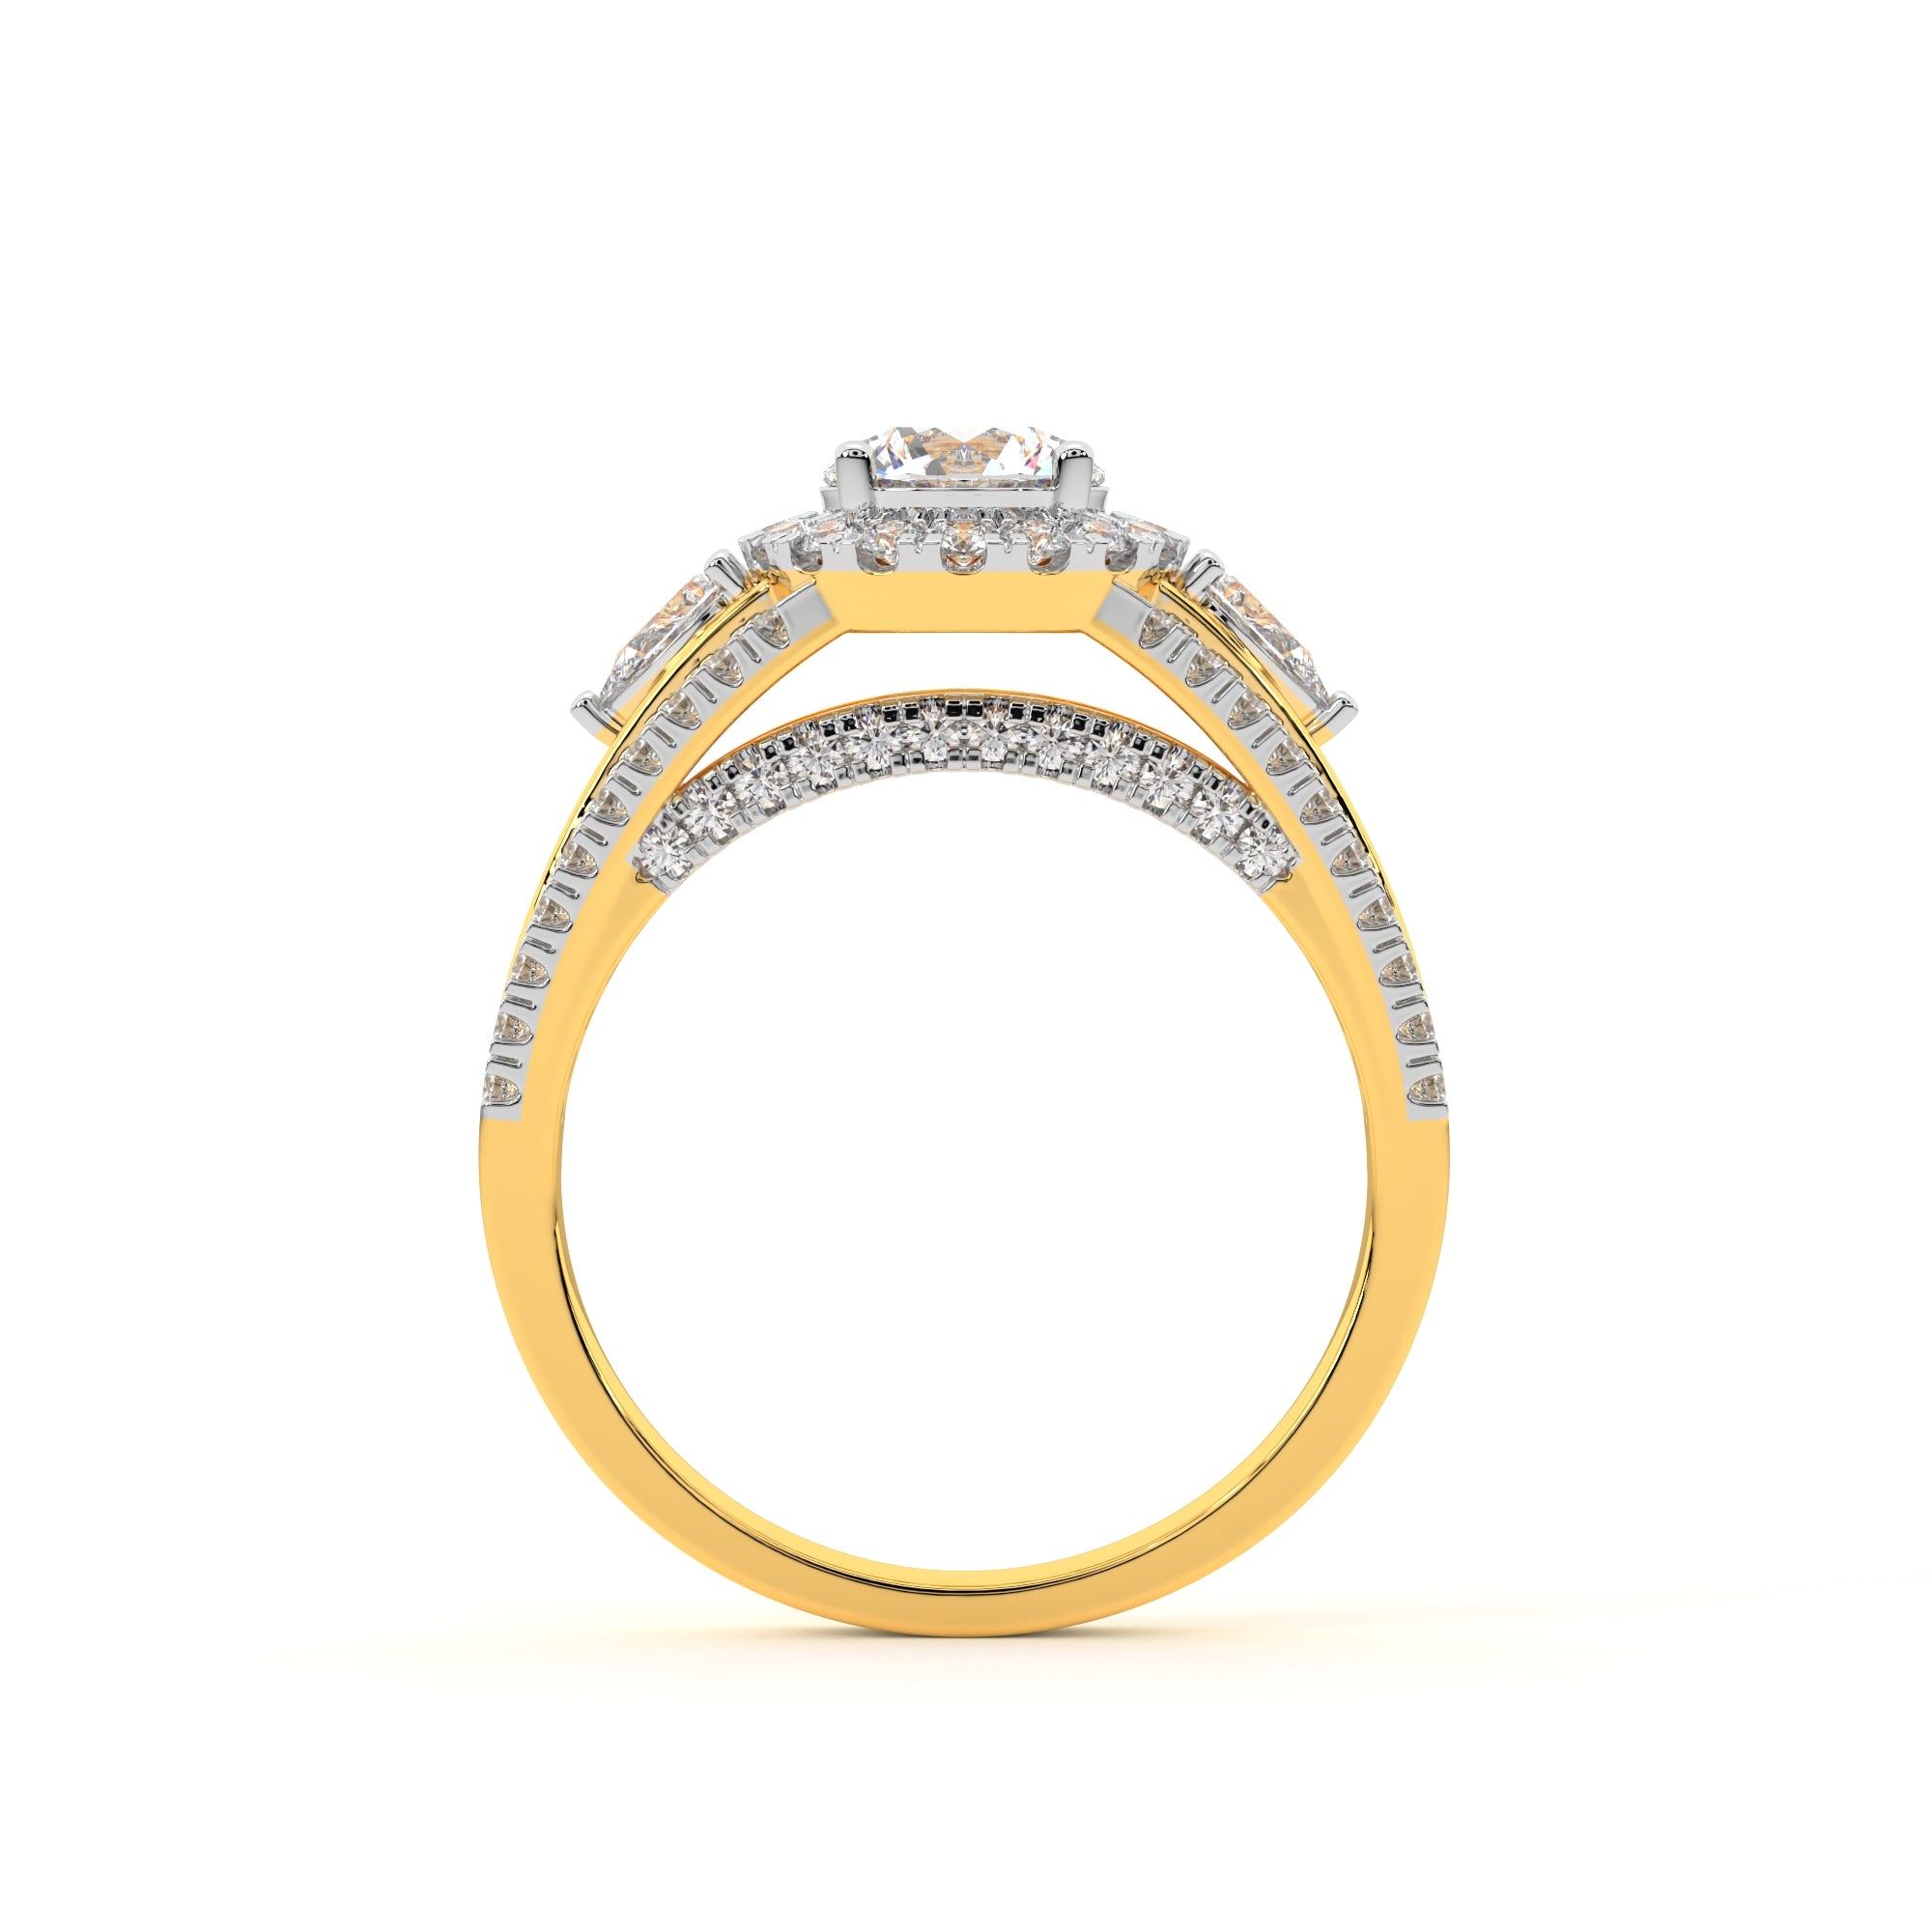 Executive Halo Ring For Her